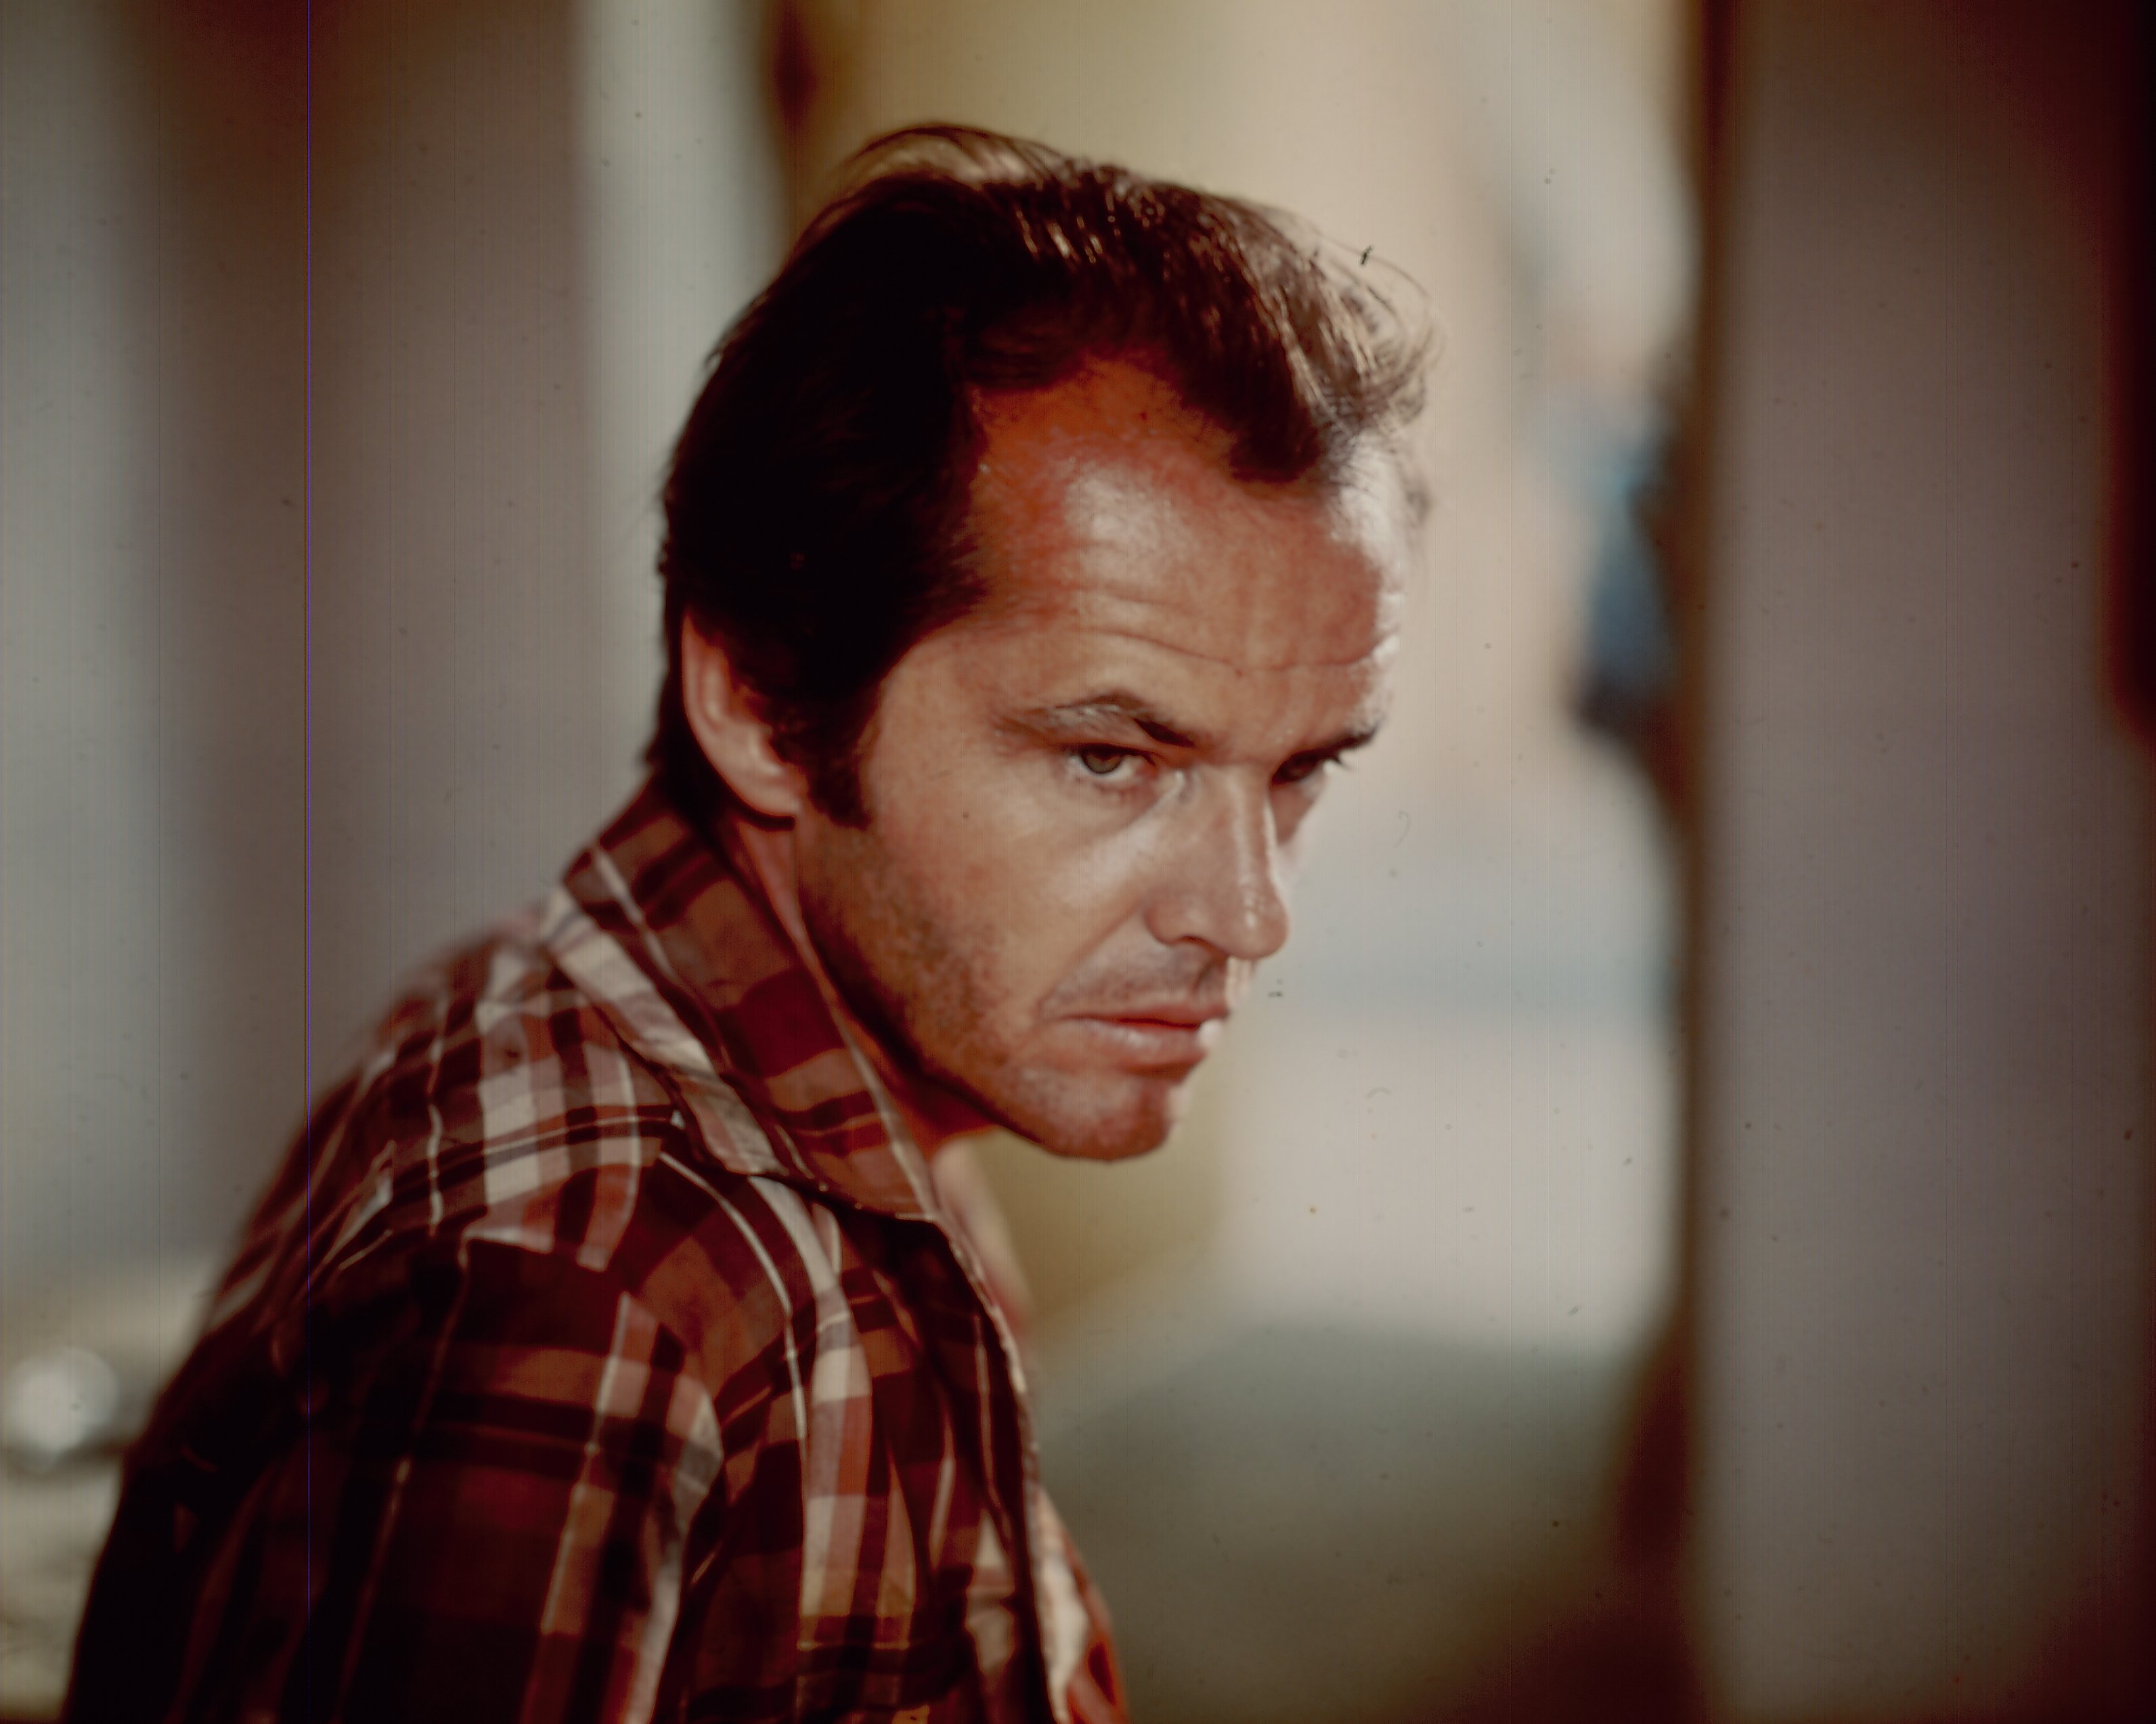 Jack Nicholson in a scene from the movie 'The Passenger', 1975. | Source: Getty Images 